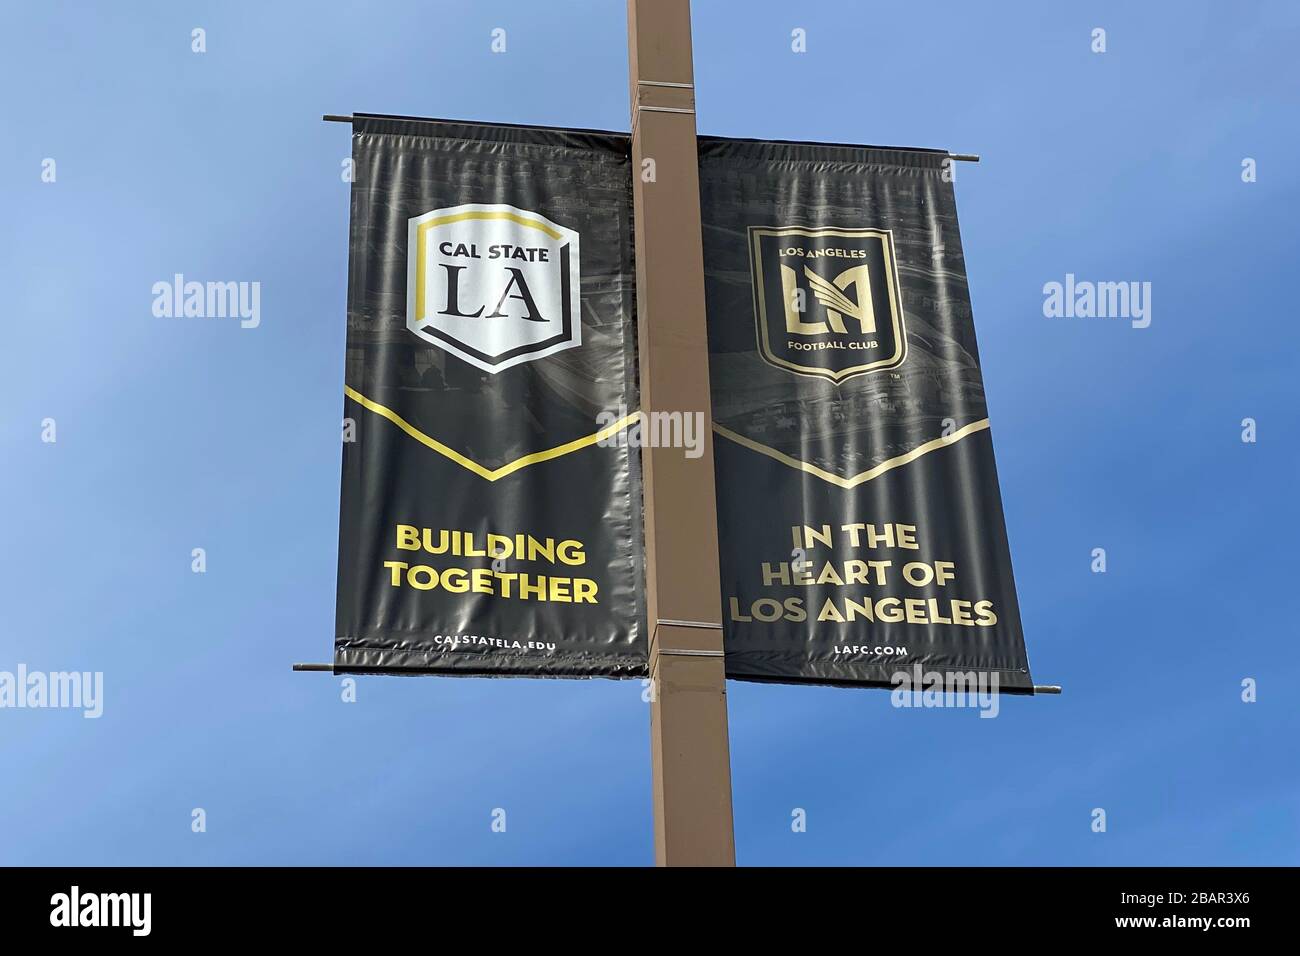 Cal State LA and LAFC banners at California State University, Los Angeles amid the global coronavirus COVID-19 pandemic, Saturday, March 28, 2020, in Monterey Park, California, USA. (Photo by IOS/Espa-Images) Stock Photo